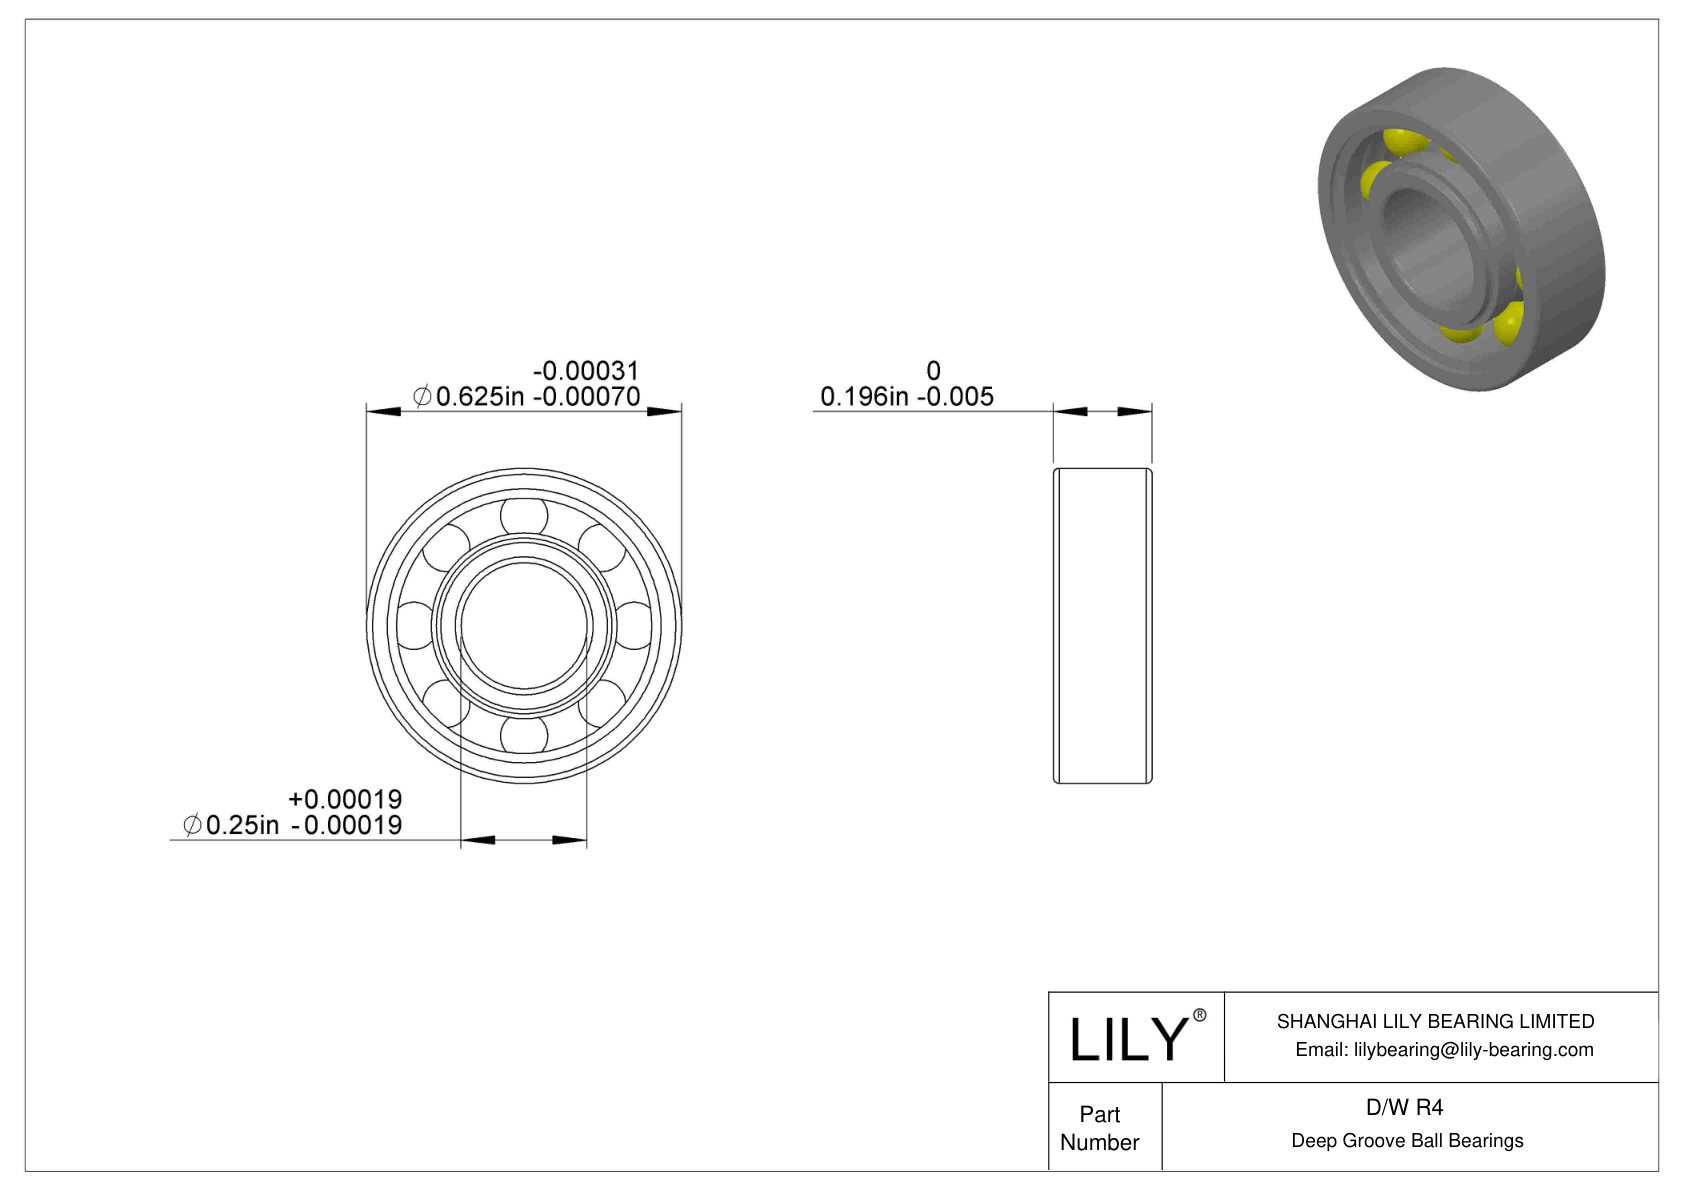 D/W R4 Stainless Steel Deep Groove Ball Bearings cad drawing